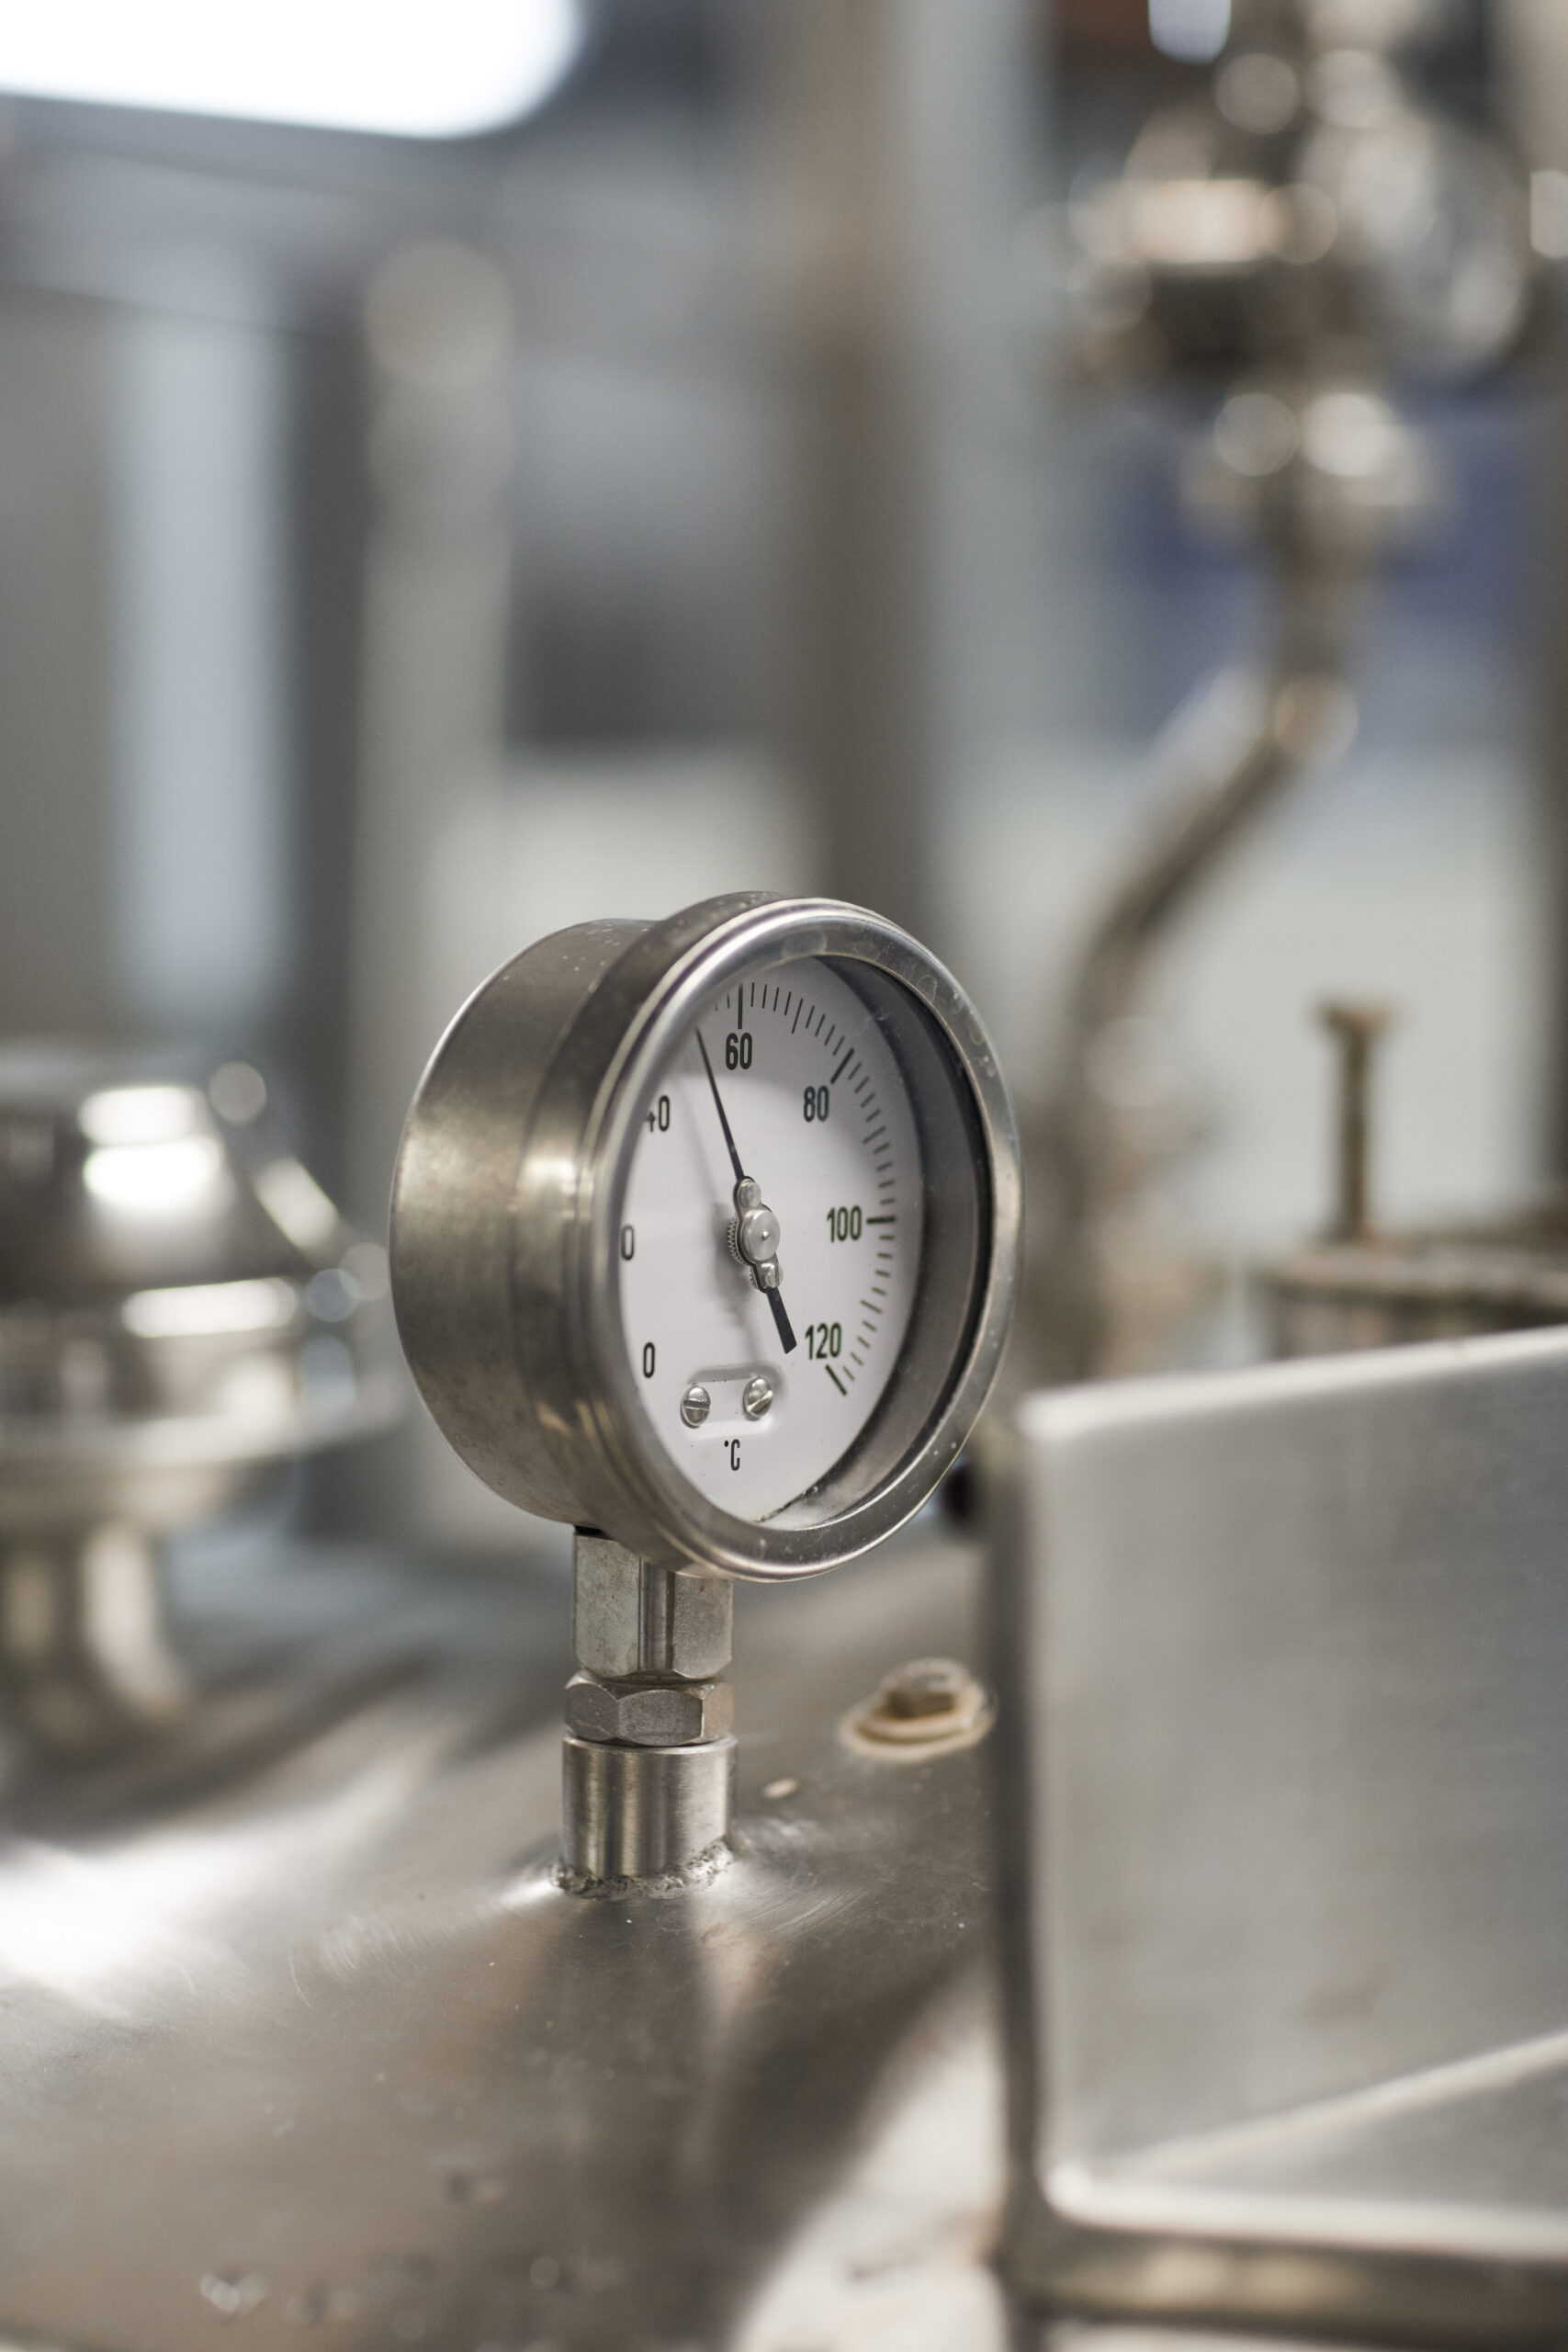 Understanding the Impact of Automated Tank Gauges on Your Bottom Line